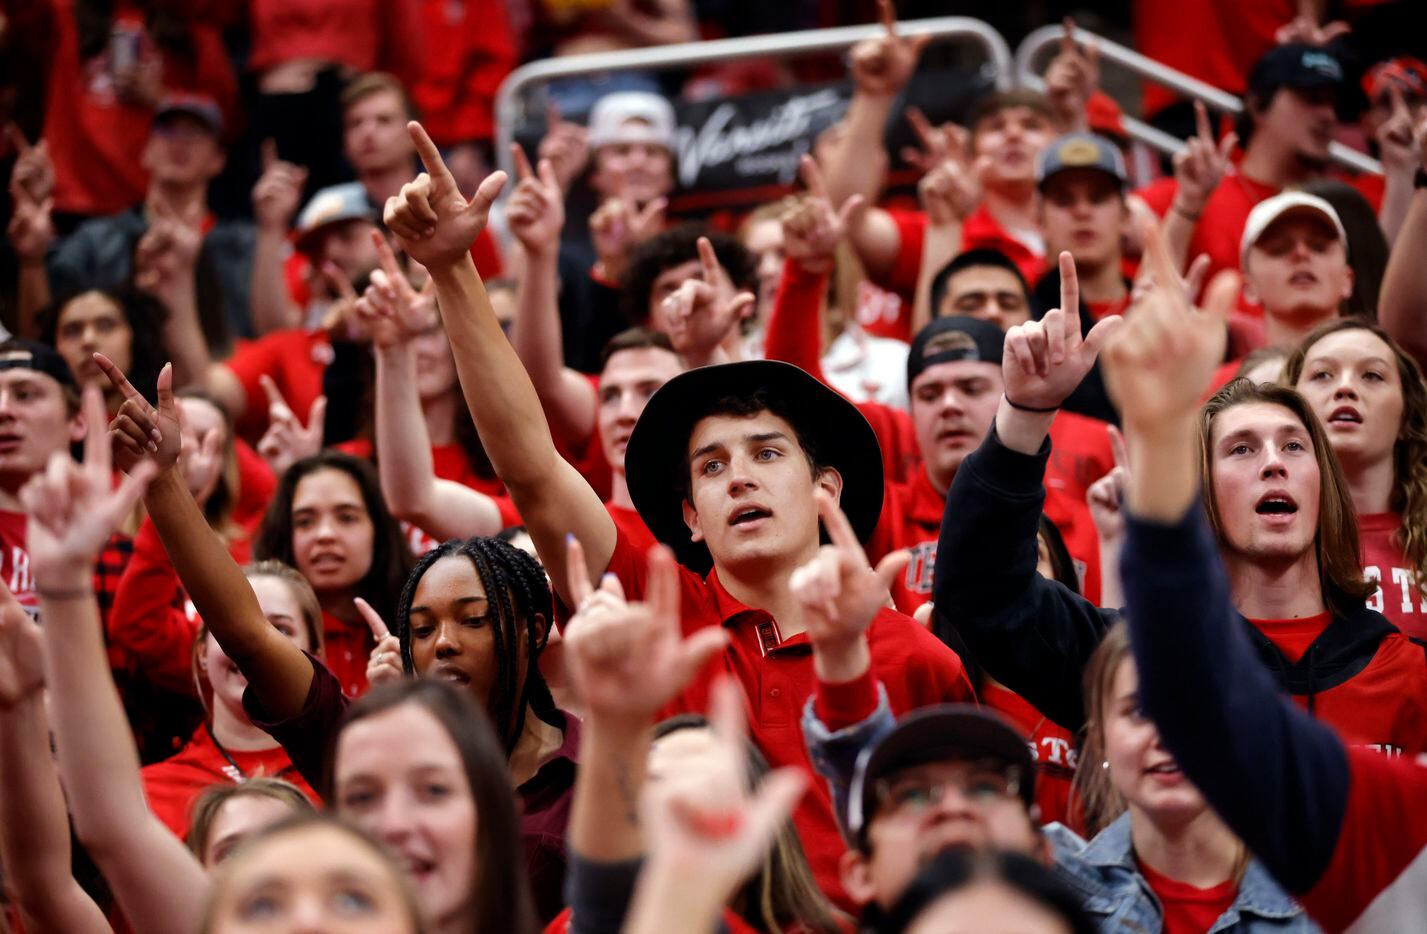 The Texas Tech Red Raiders student body get their ‘guns up’ hand sign before their team...